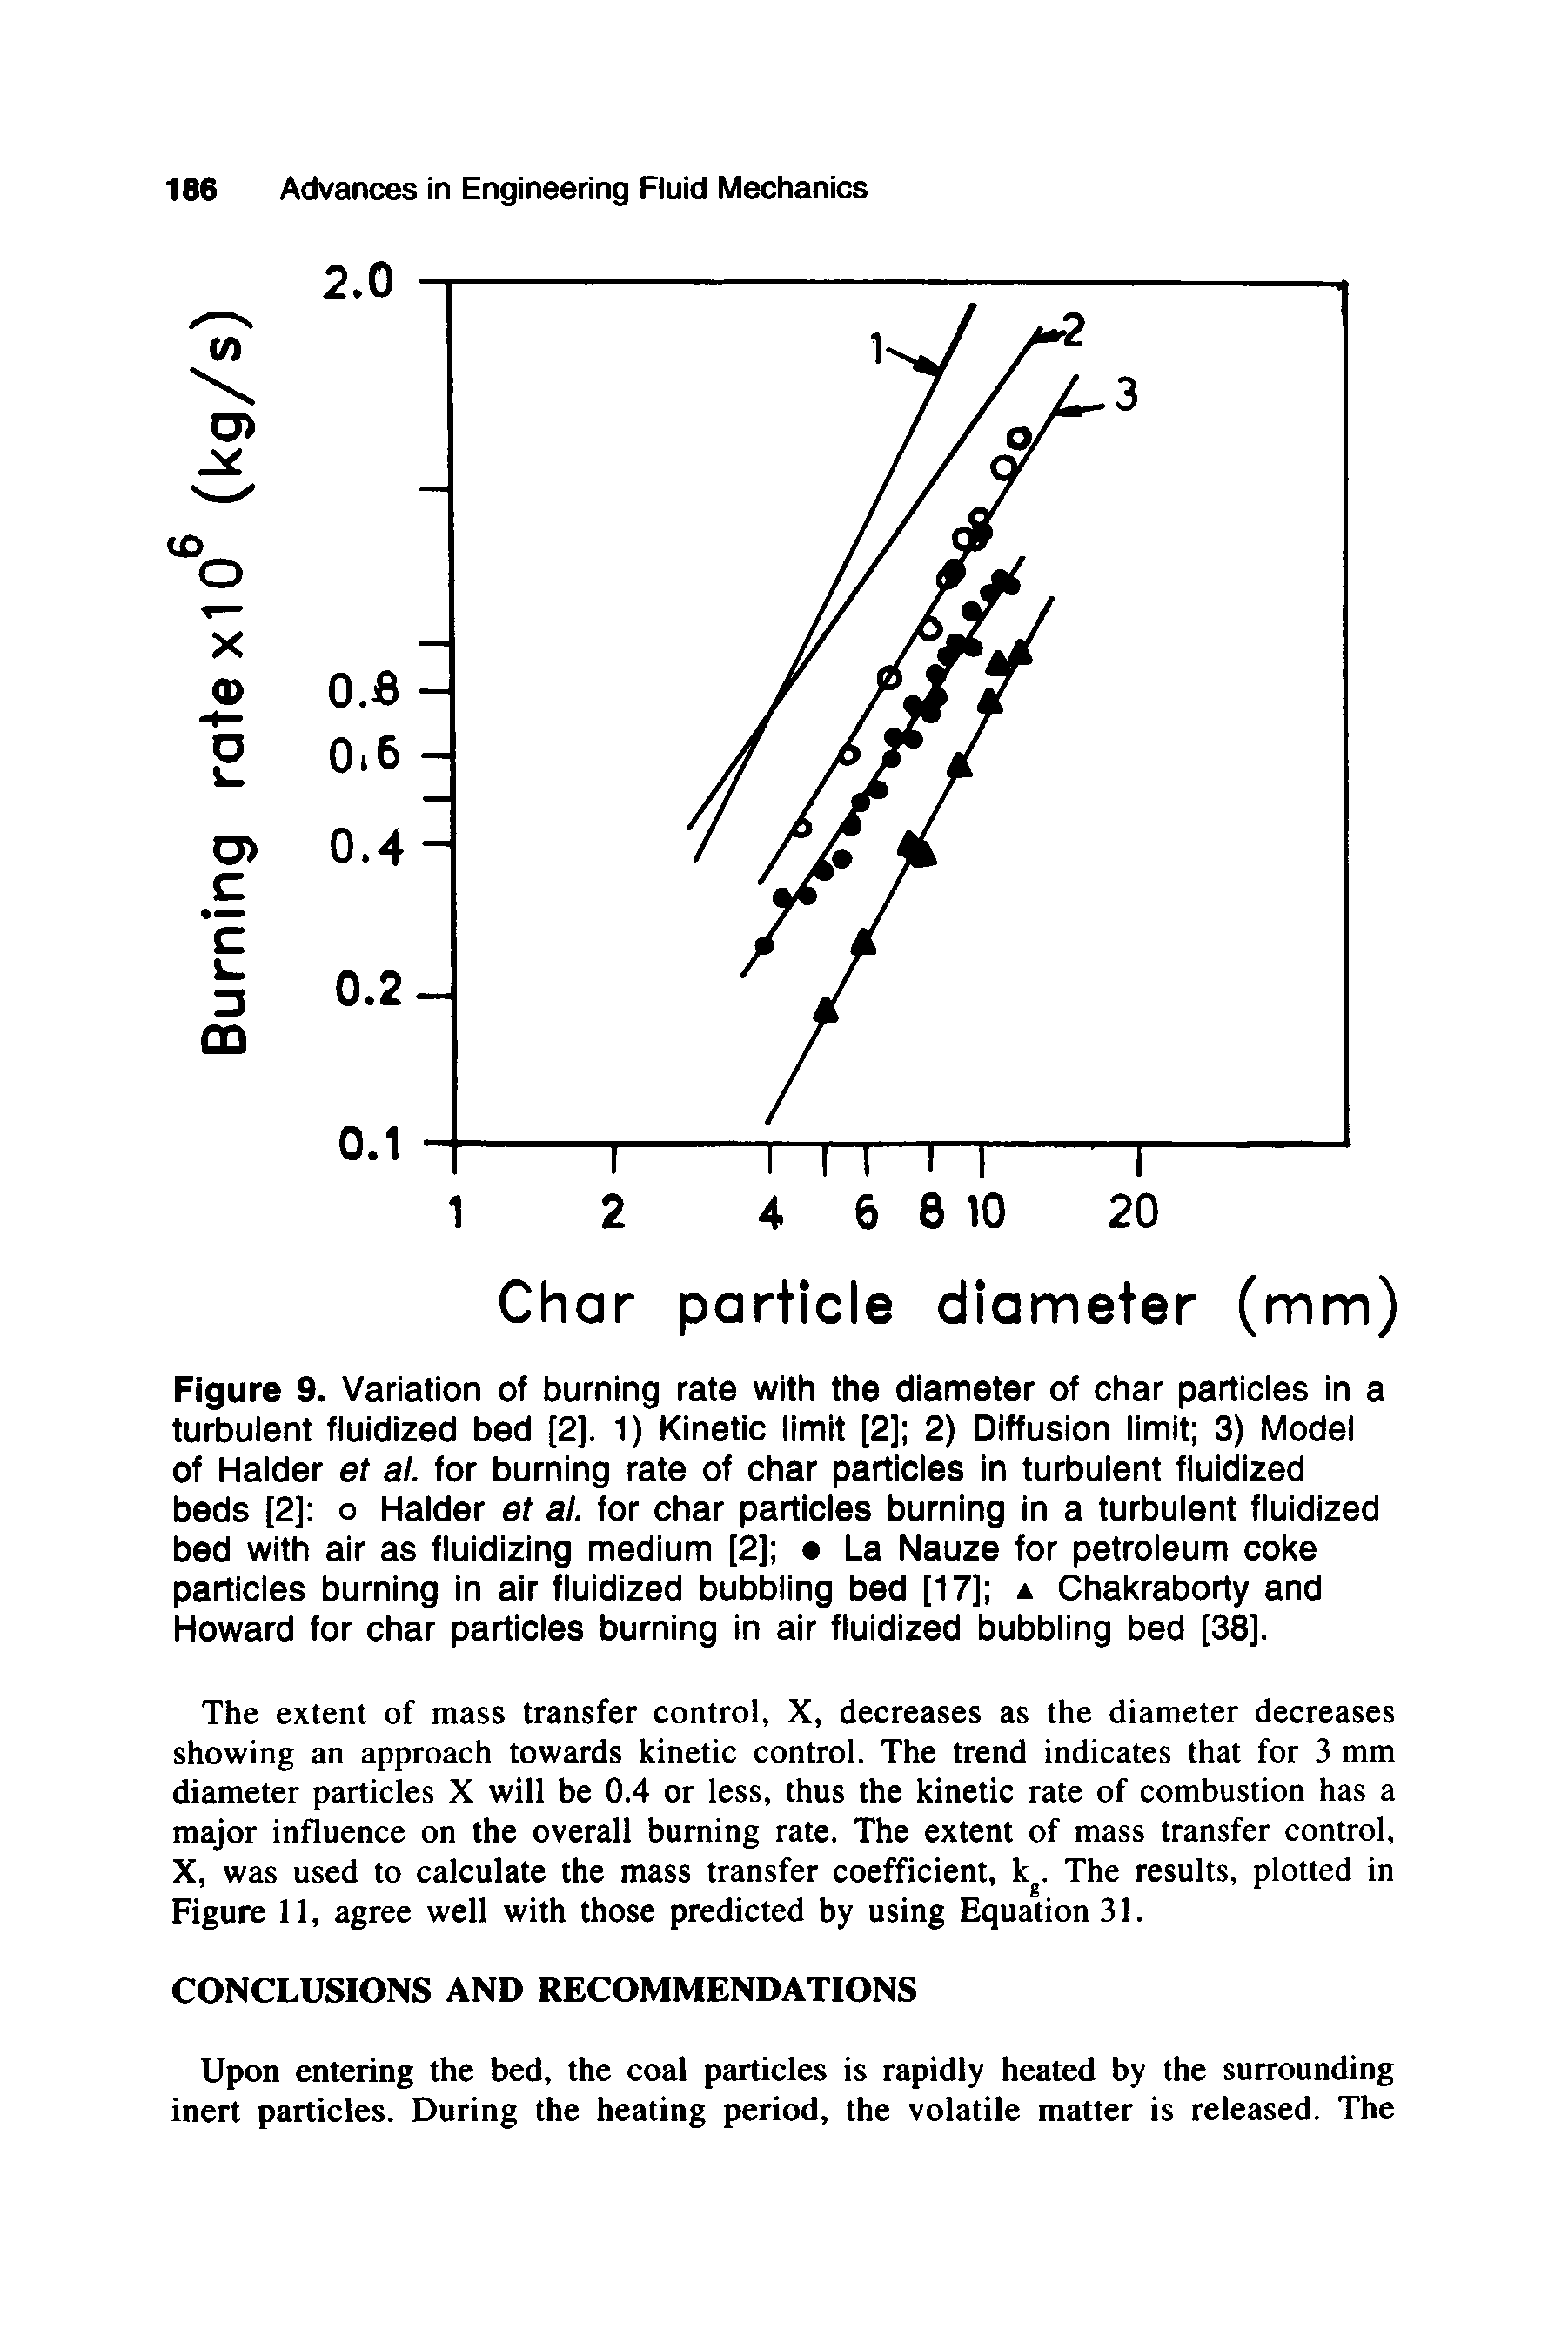 Figure 9. Variation of burning rate with the diameter of char particies in a turbulent fluidized bed [2]. 1) Kinetic limit [2] 2) Diffusion limit 3) Model of Haider et al. for burning rate of char particles in turbulent fluidized beds [2] o Haider et al. for char particles burning in a turbulent fluidized bed with air as fluidizing medium [2] c La Nauze for petroleum coke particles burning in air fluidized bubbling bed [17] a Chakraborty and Howard for char particles burning in air fluidized bubbling bed [38].